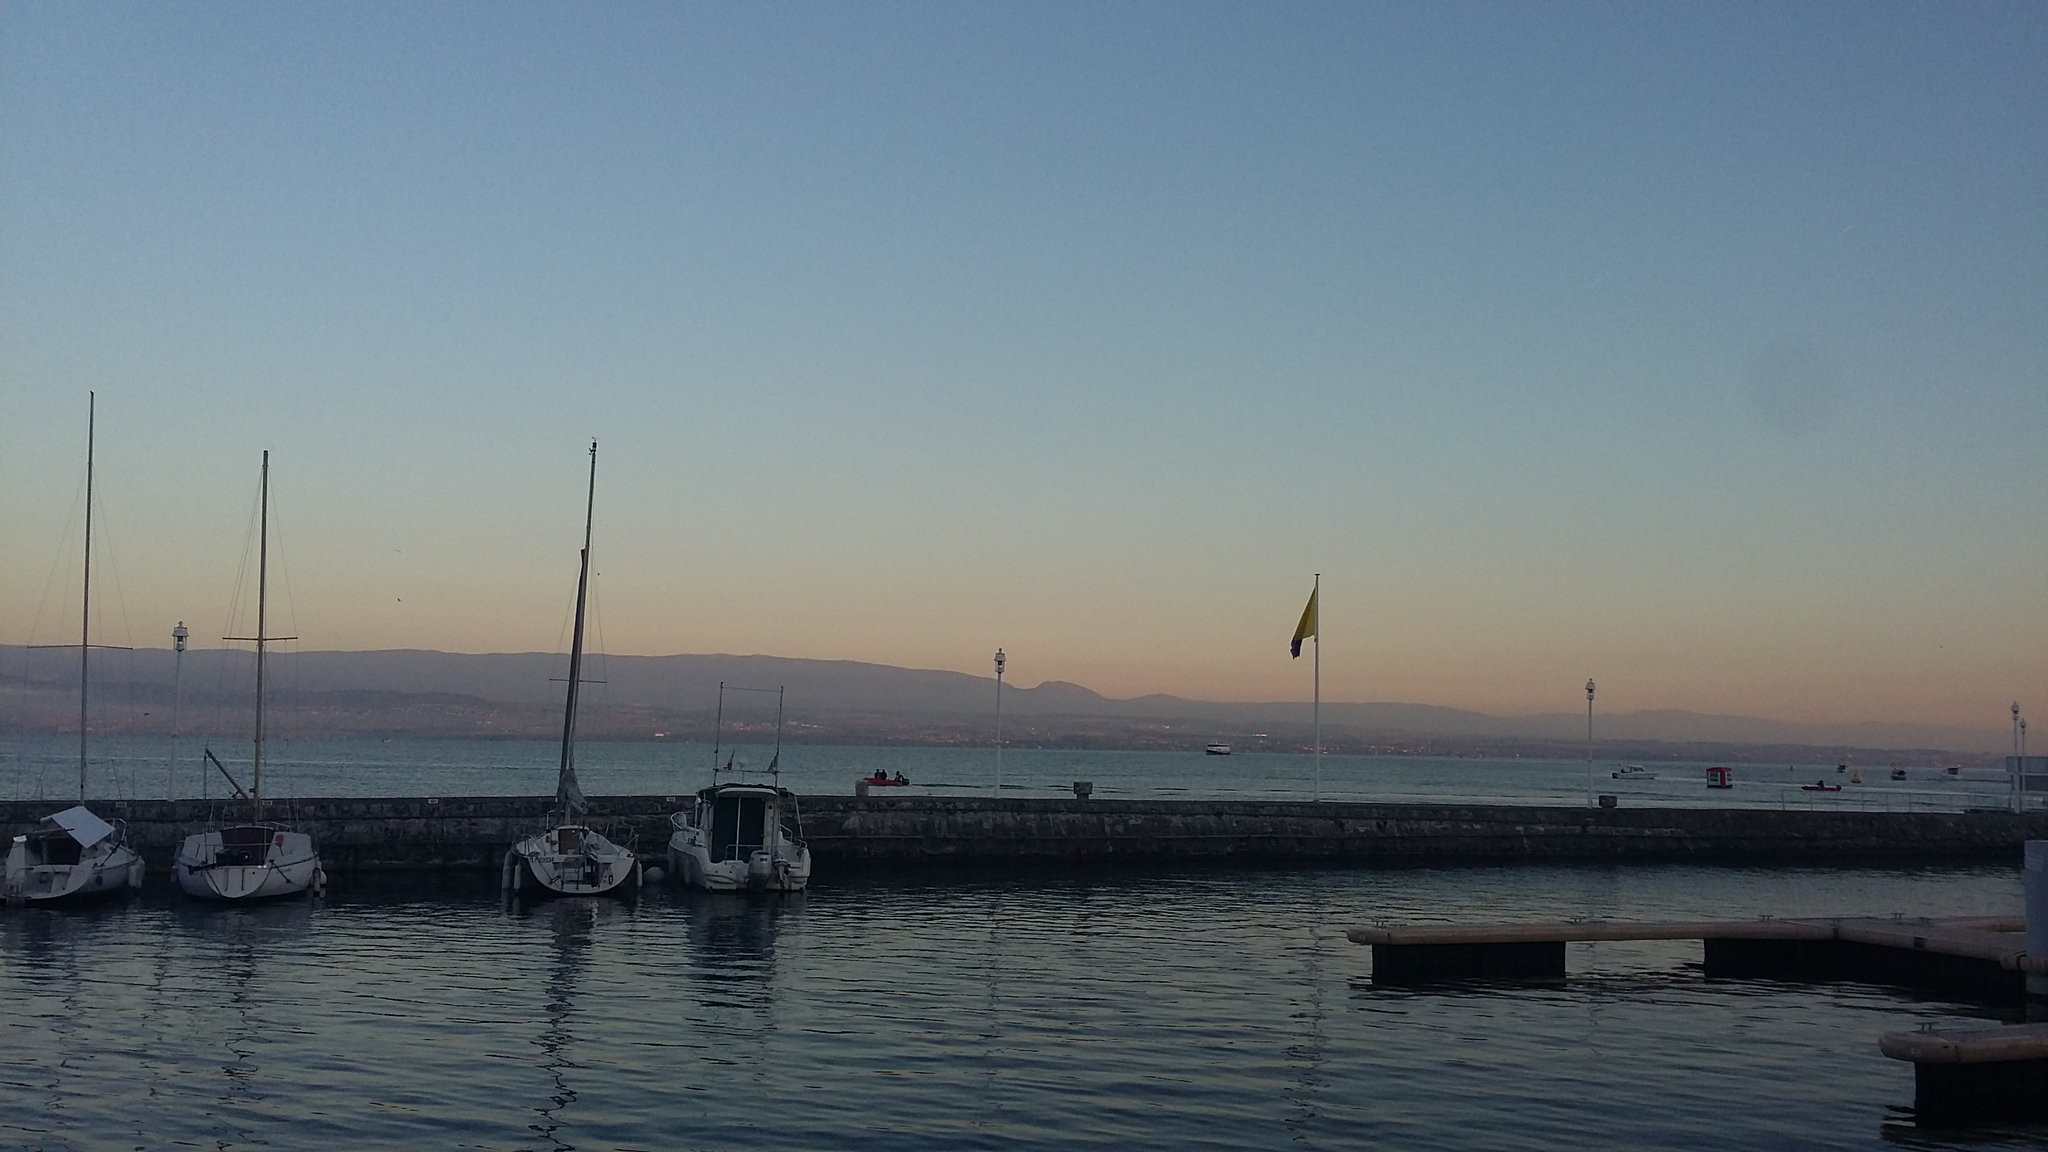 Racing is currently taking place on Lake Geneva ©World Rowing